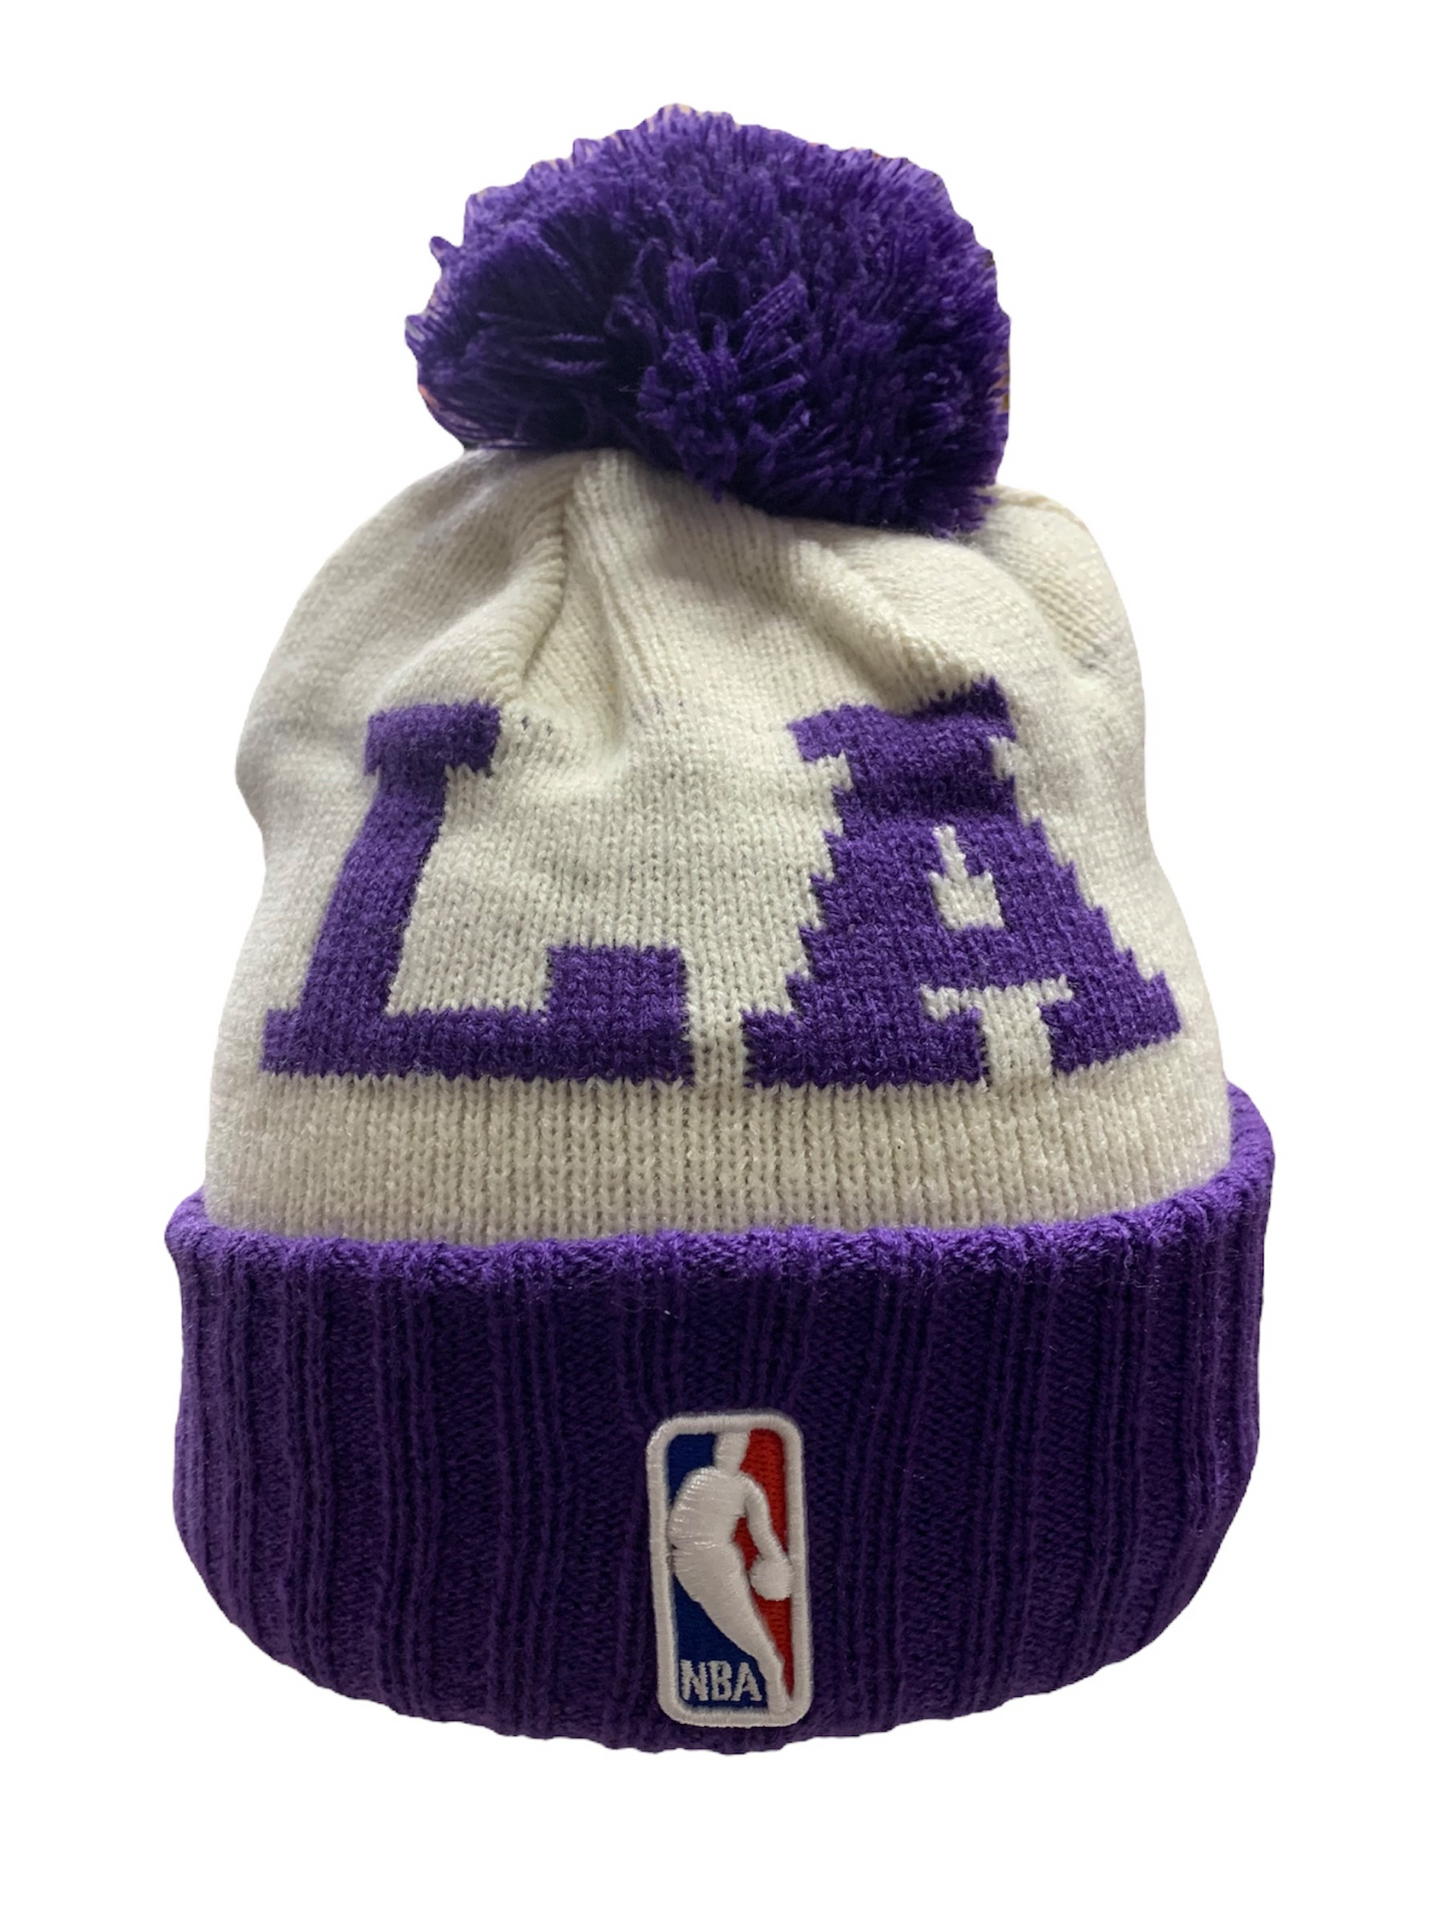 Official Los Angeles Lakers Beanies, Knit, Winter Hats